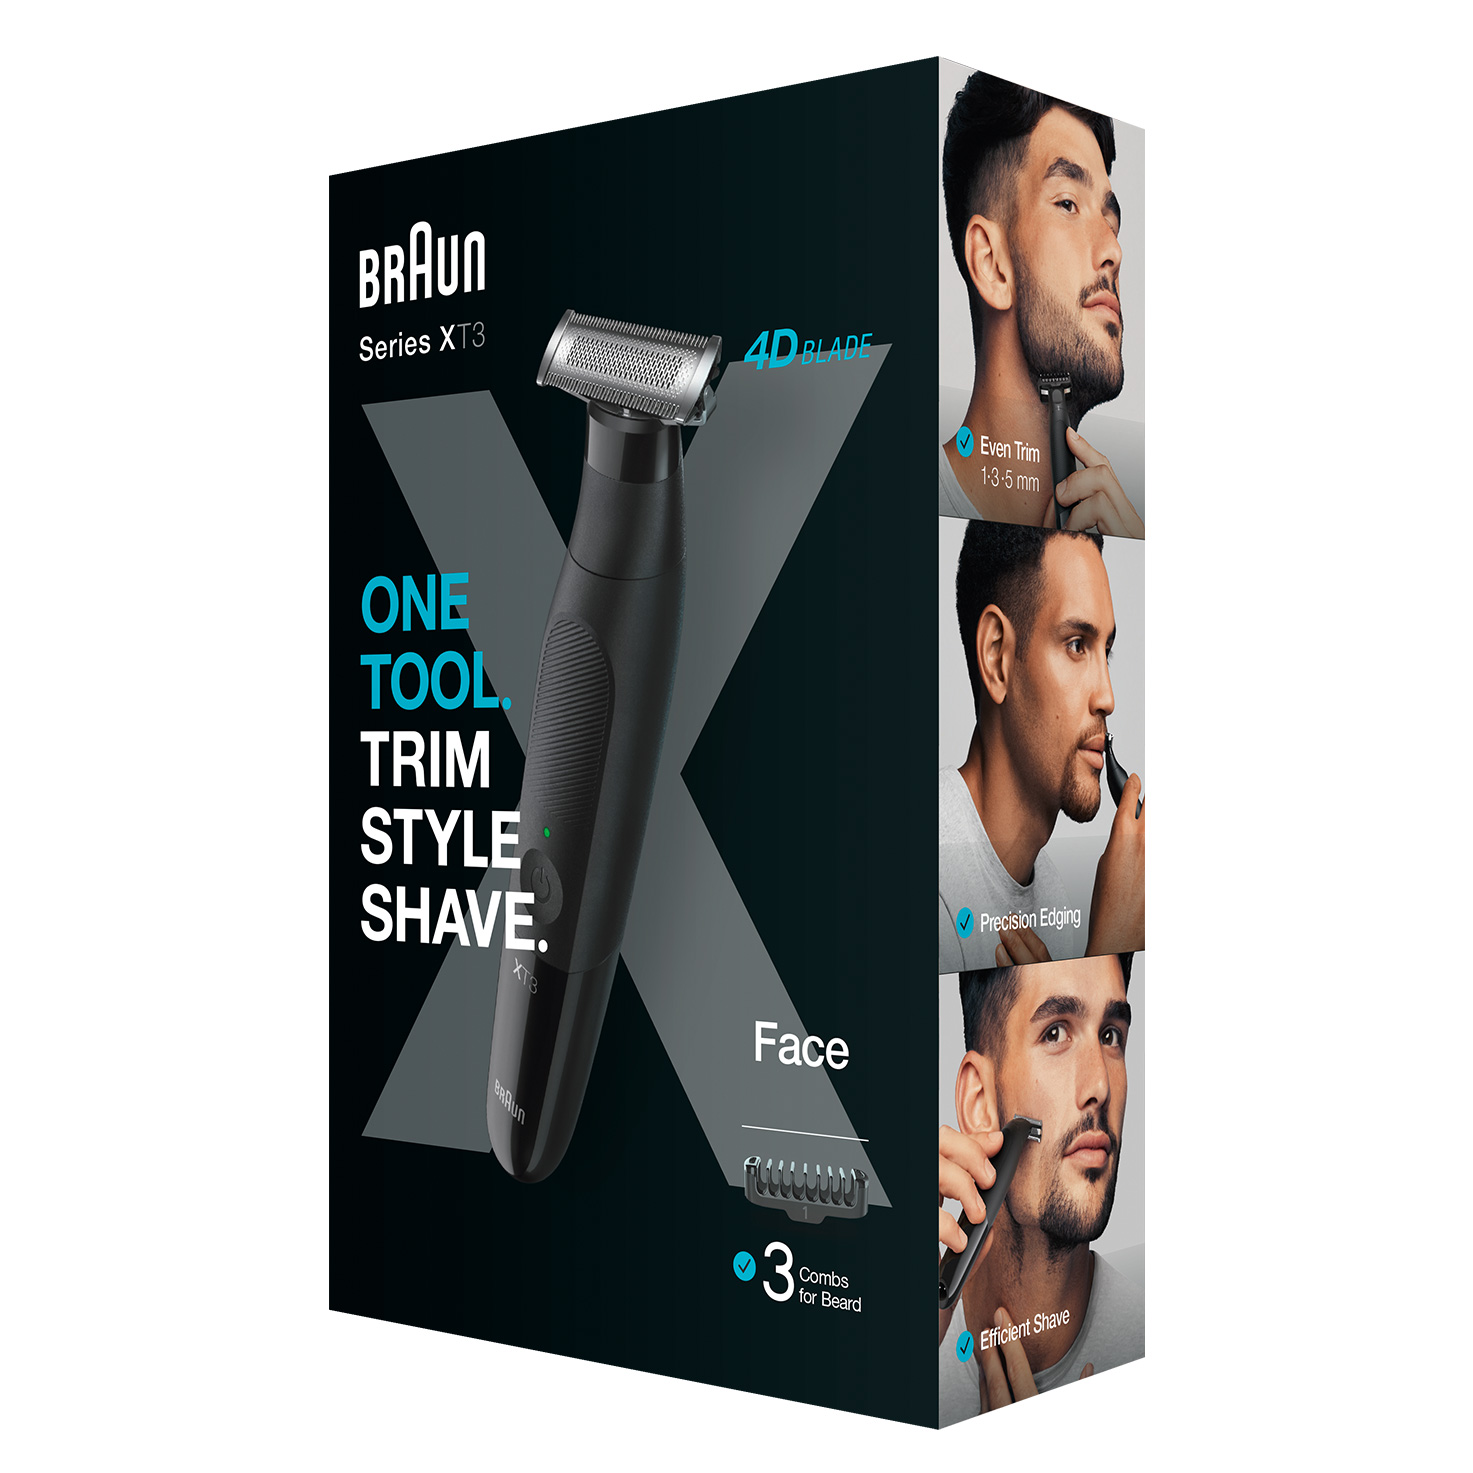 Series X all-in-one body groomers & trimmers for men | Braun SG